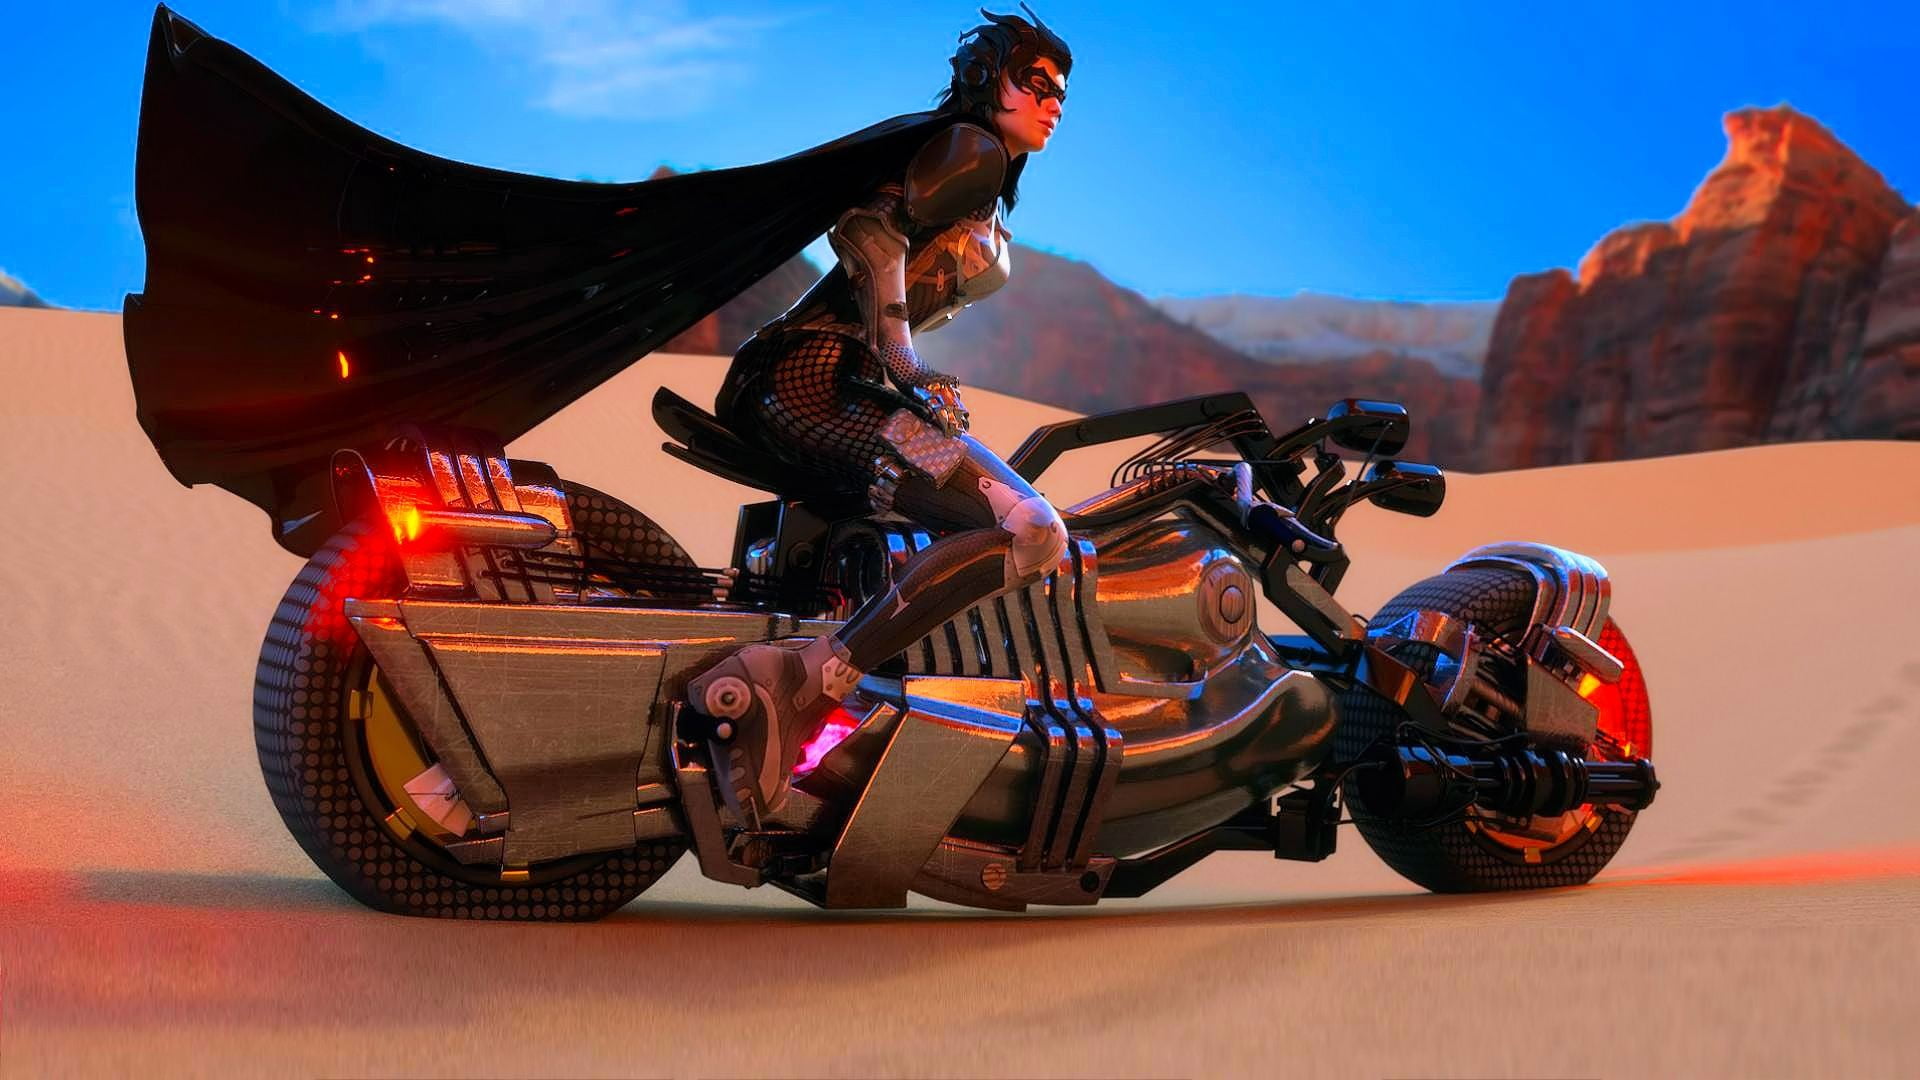 animated lady wearing black cape riding motorcycle on desert during daytime